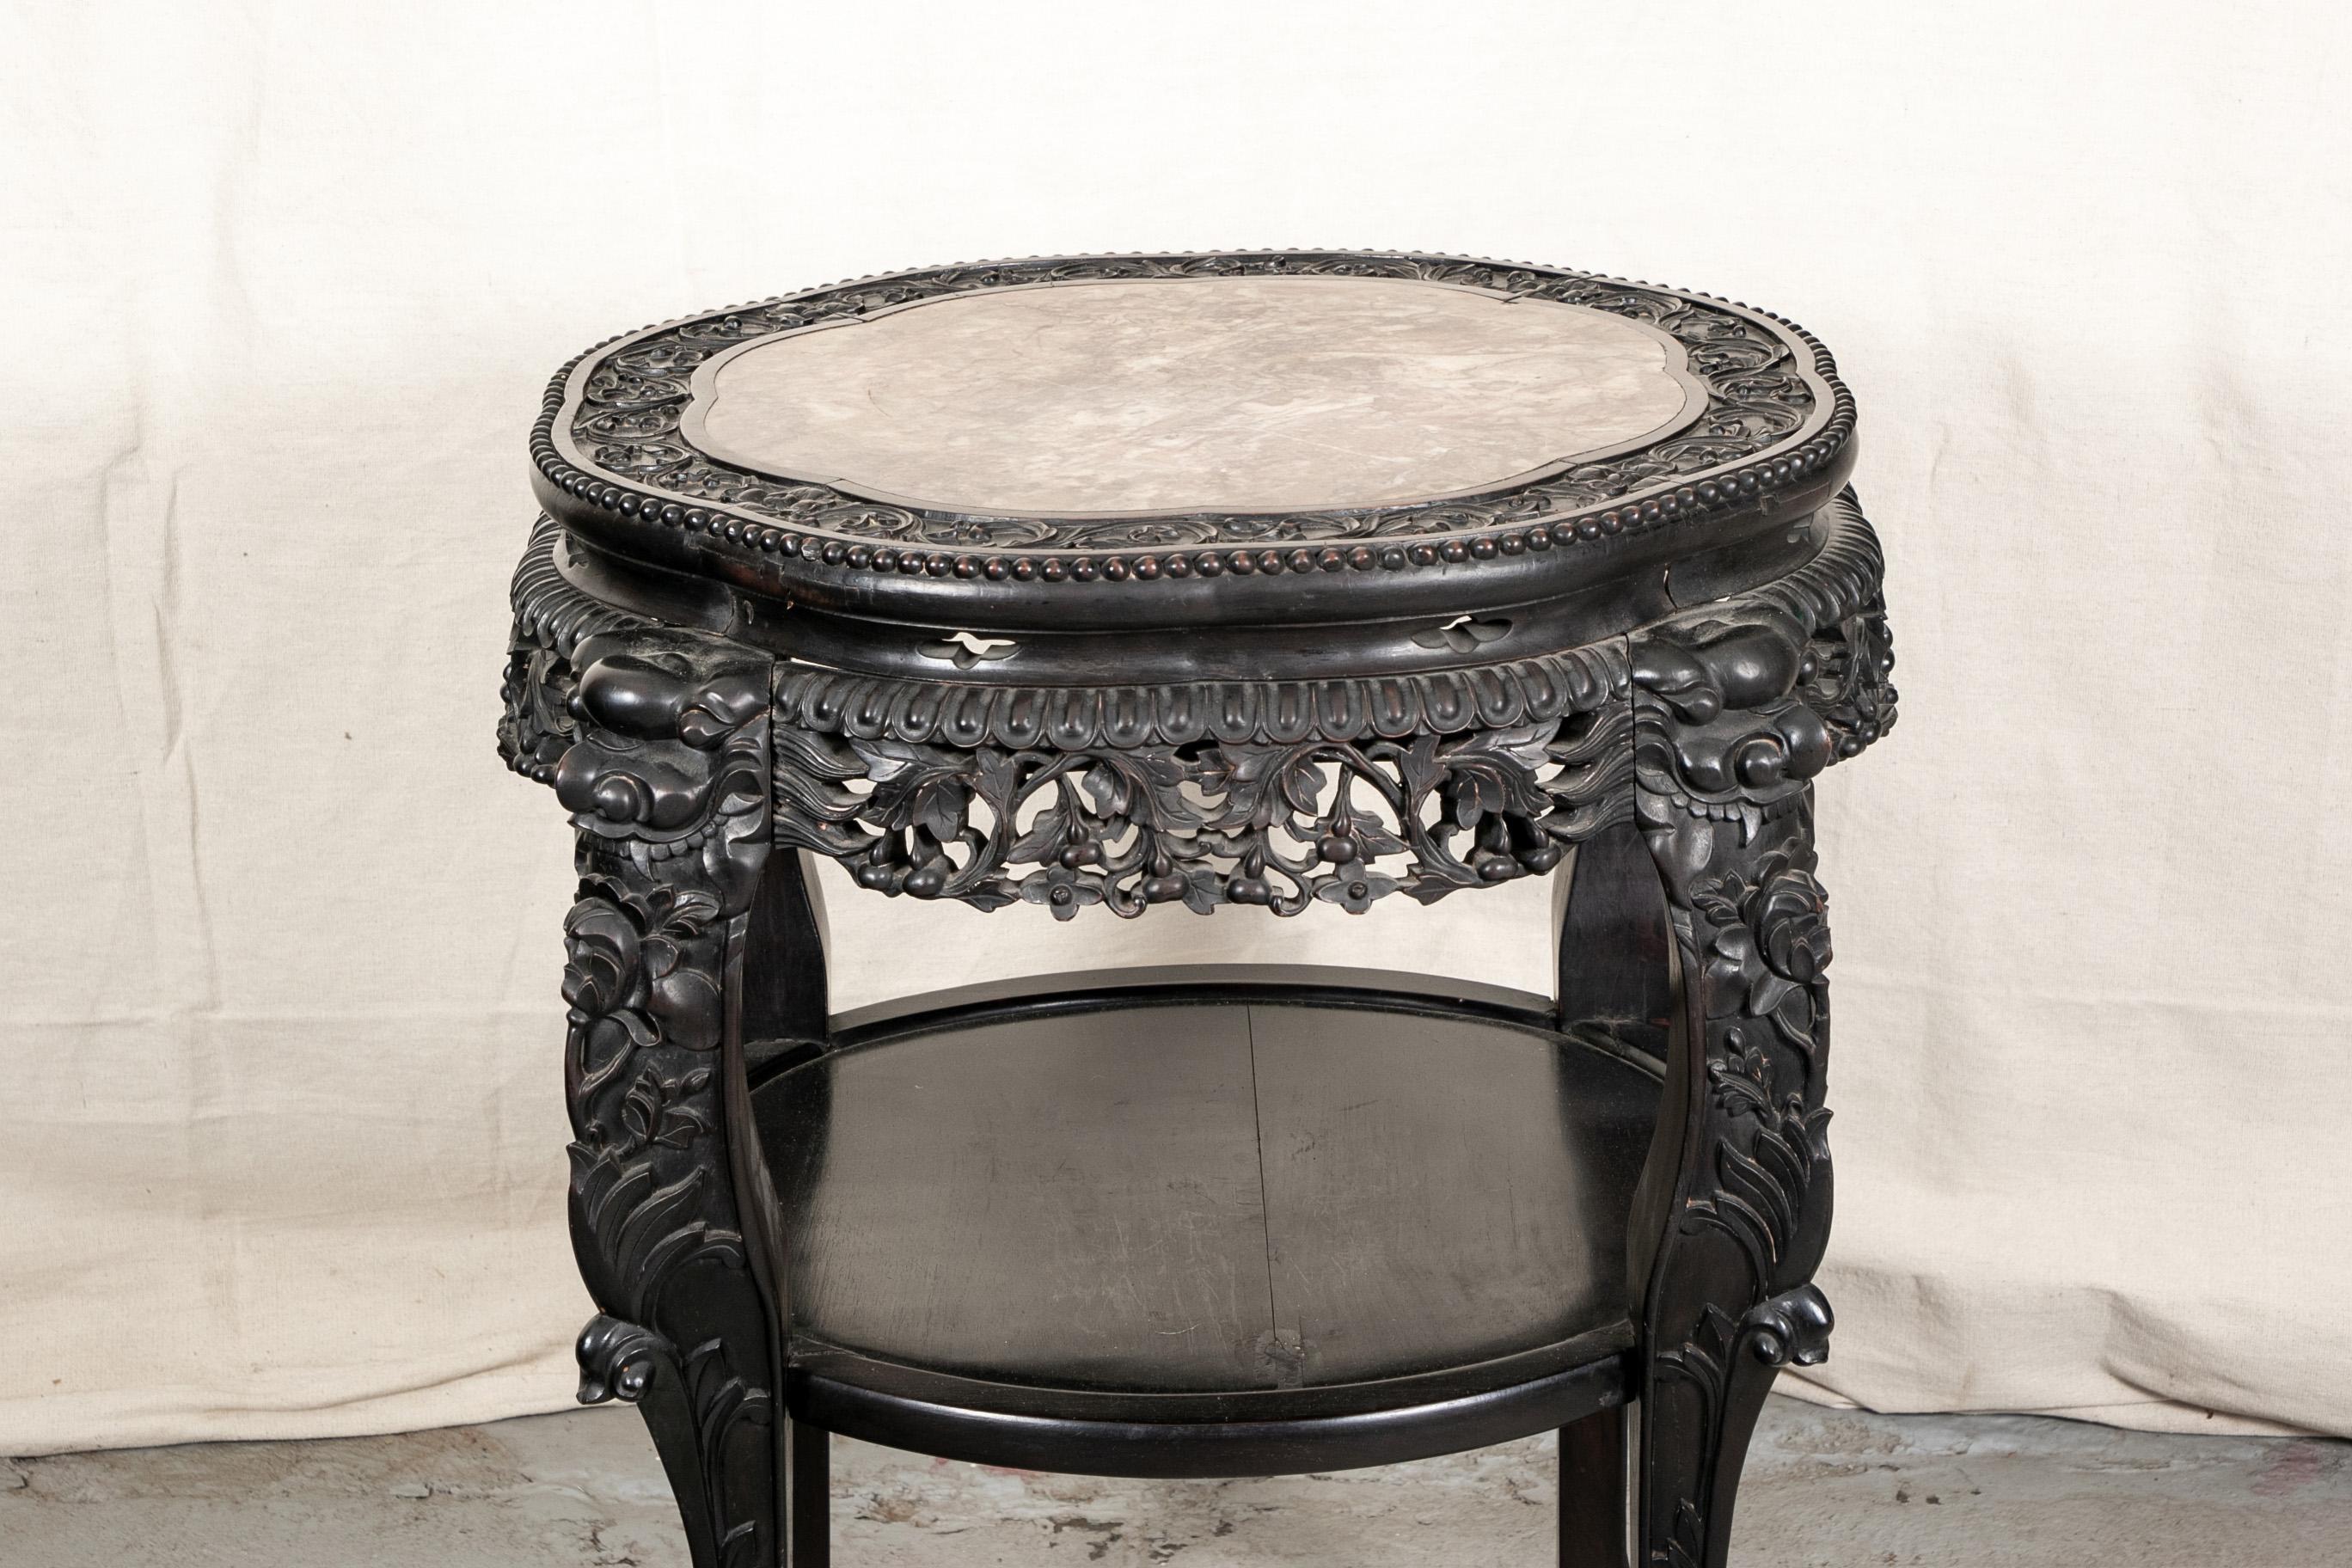 Dark stained and elaborately carved wood with a lower tier with lip. The shaped round top with a scrolled floral band with inset variegated marble top. The carved openwork frieze with four heavy carved legs with bird masks and floral motifs. Shaped